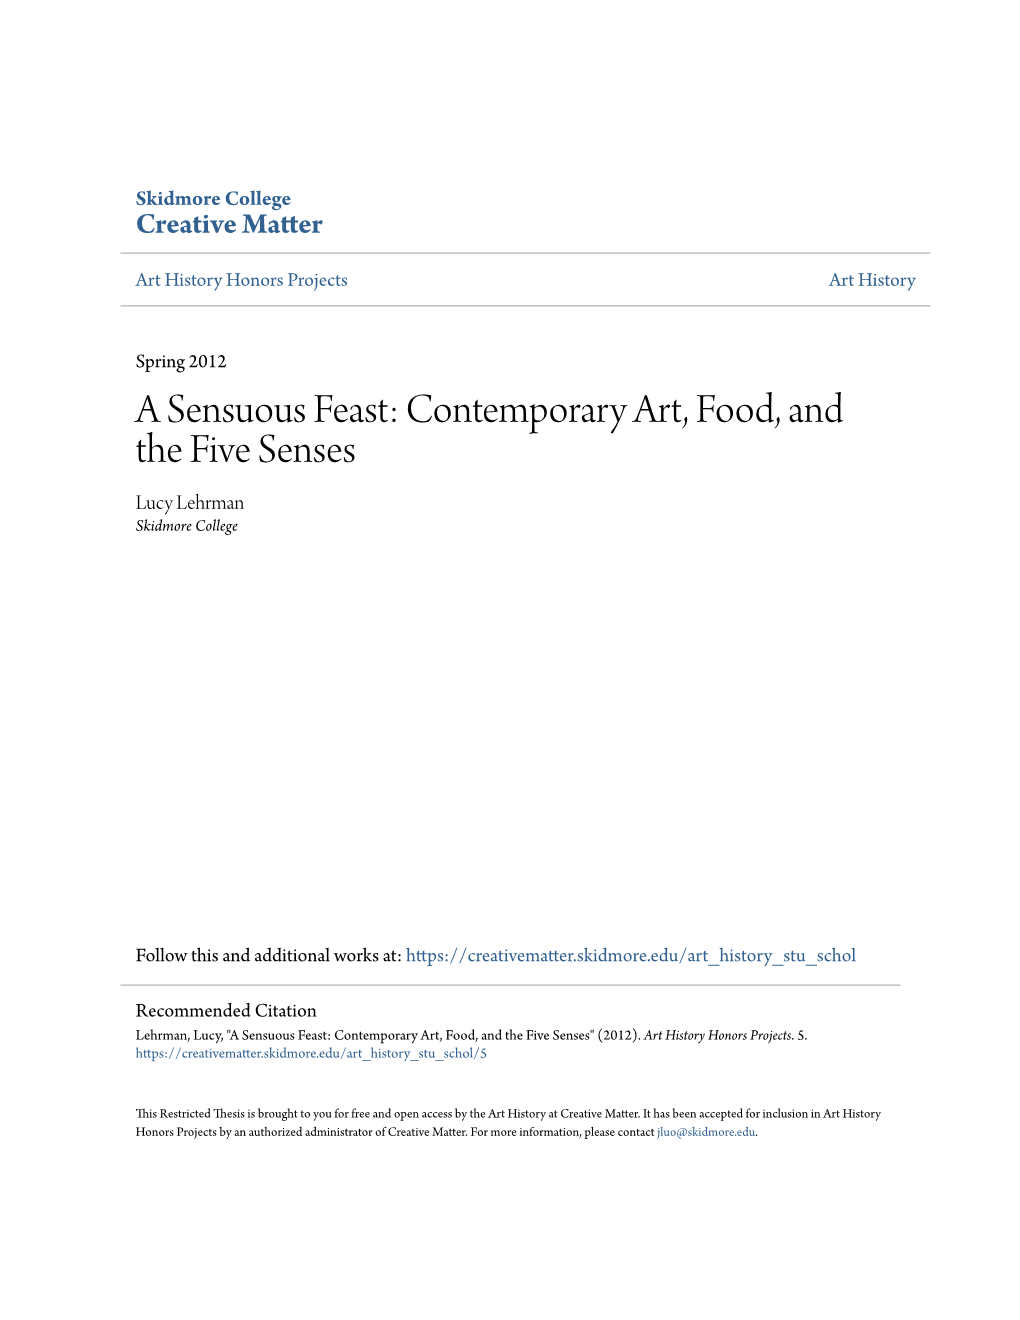 A Sensuous Feast: Contemporary Art, Food, and the Five Senses Lucy Lehrman Skidmore College